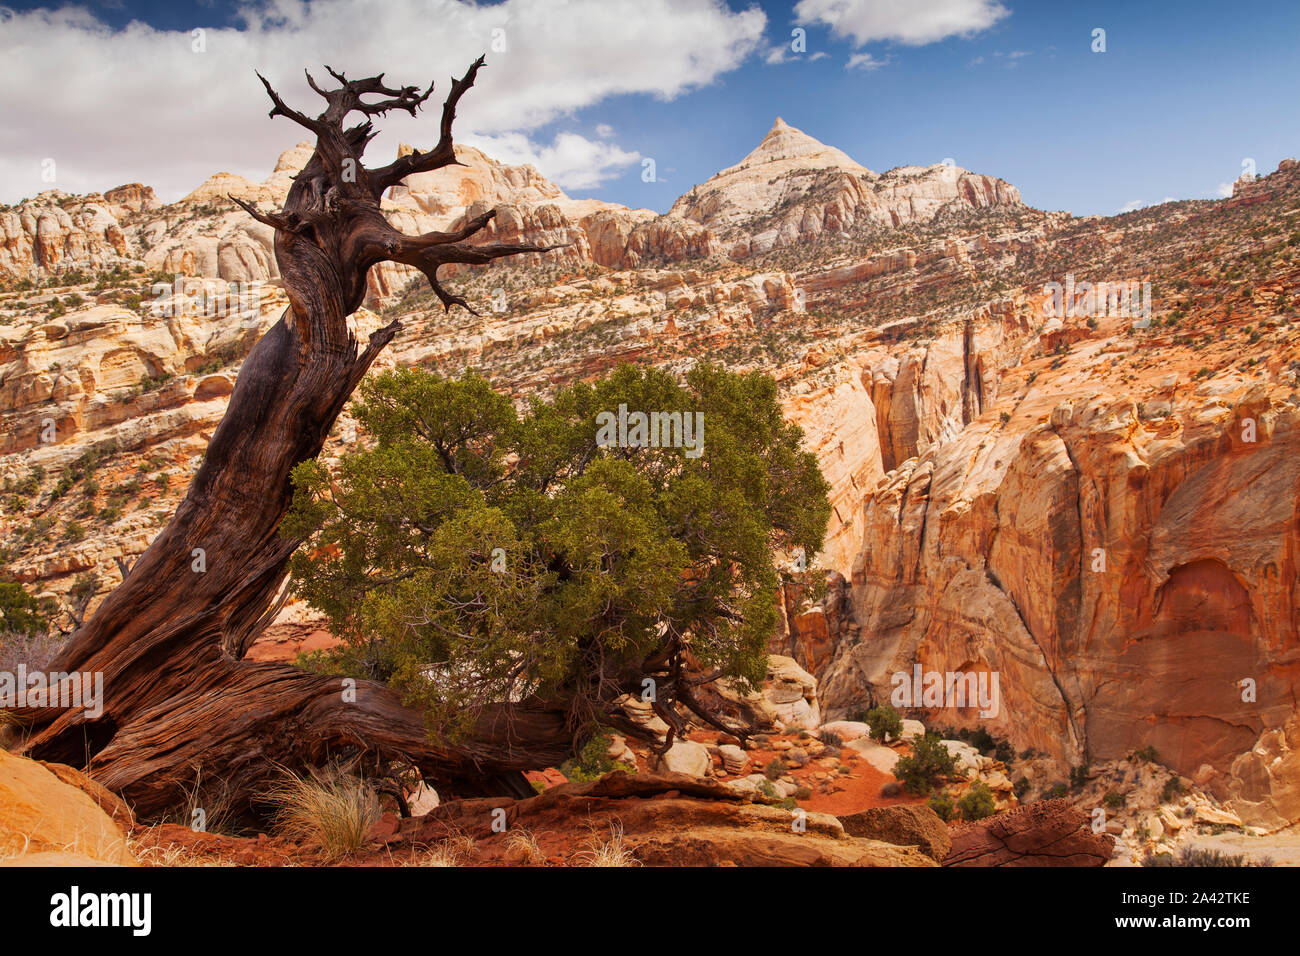 Gnarled tree in a surreal landscape, Capitol Reef National Park, Utah Stock Photo